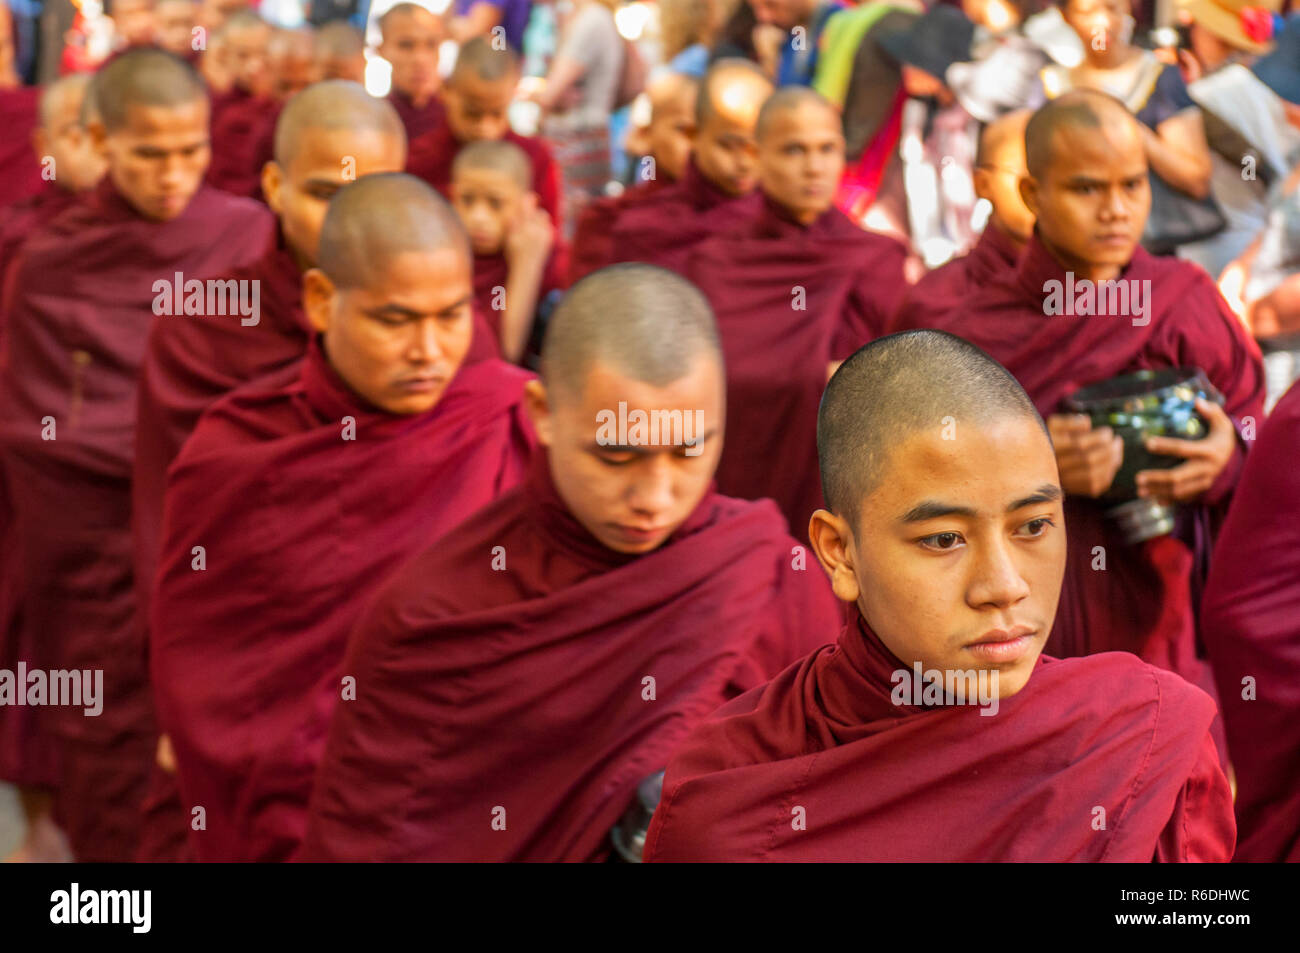 Buddhist Novices Walk To Collect Alms And Offerings In Amarapura Near Mandalay, Myanmar This Procession Is Held Every Day Stock Photo